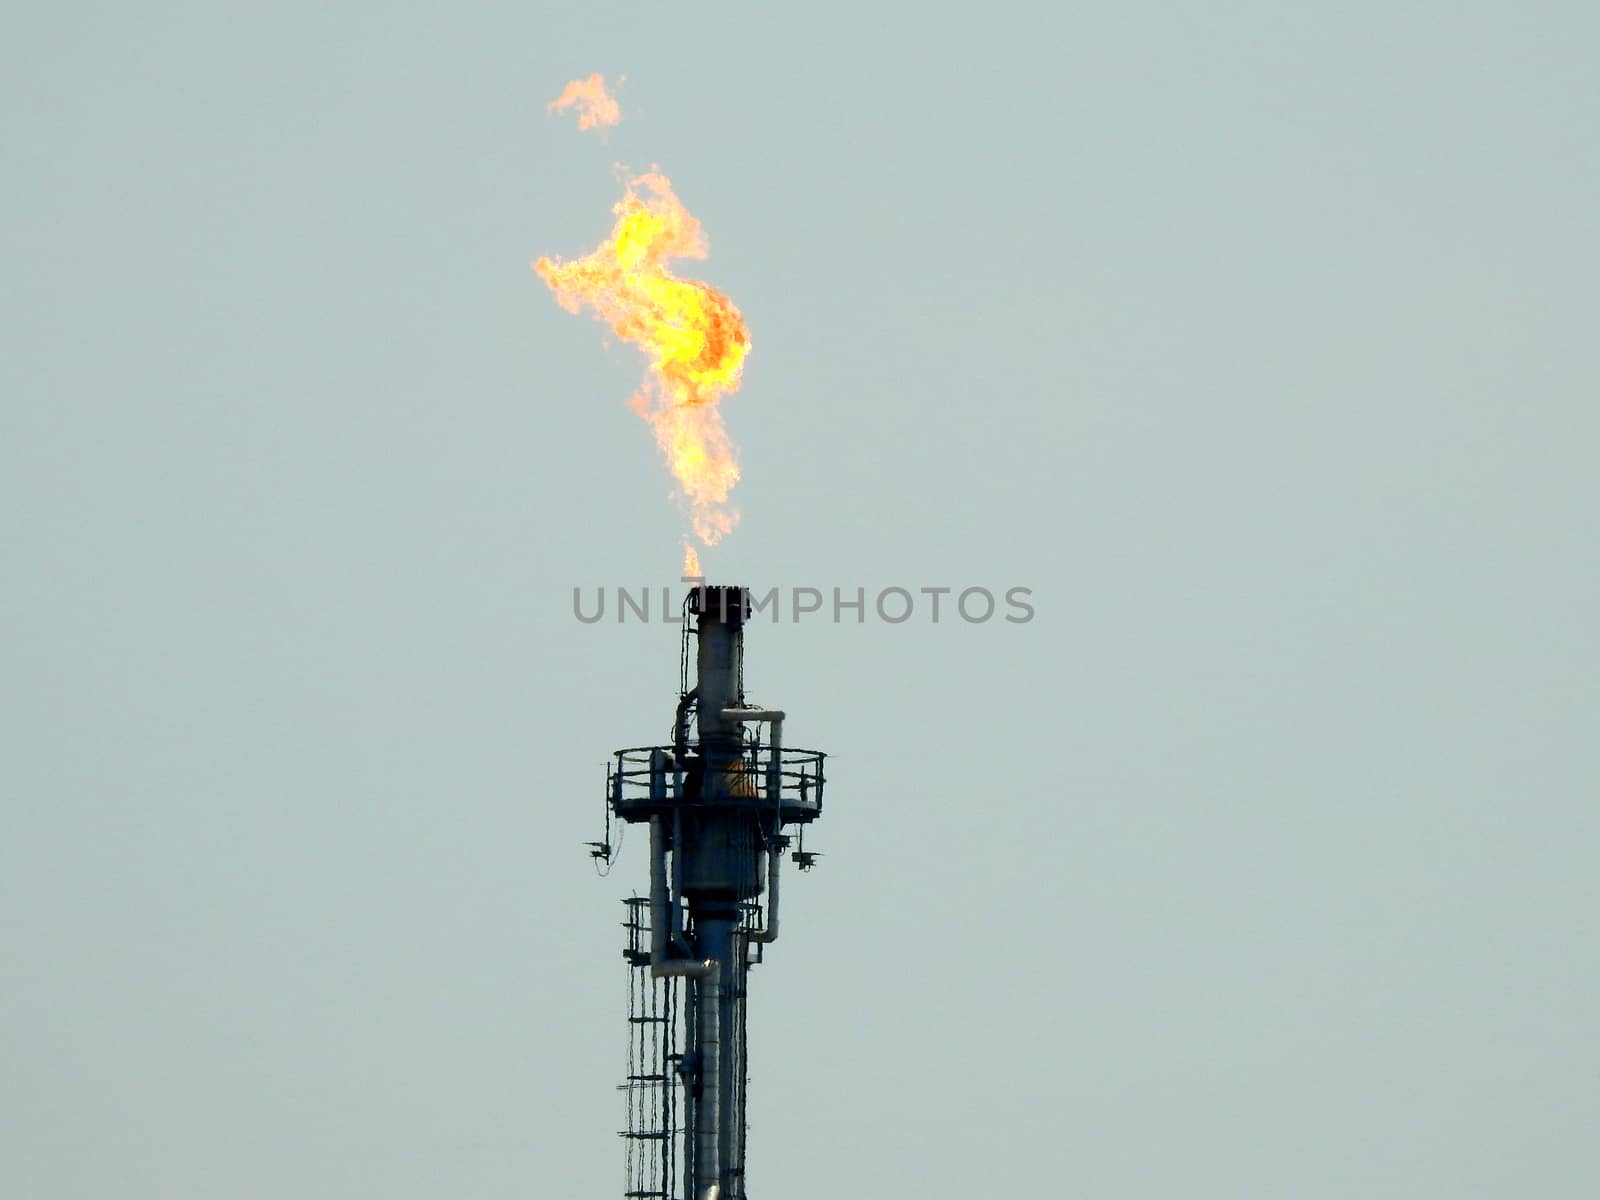 Oil burning against the blue sky in Thailand by pkproject